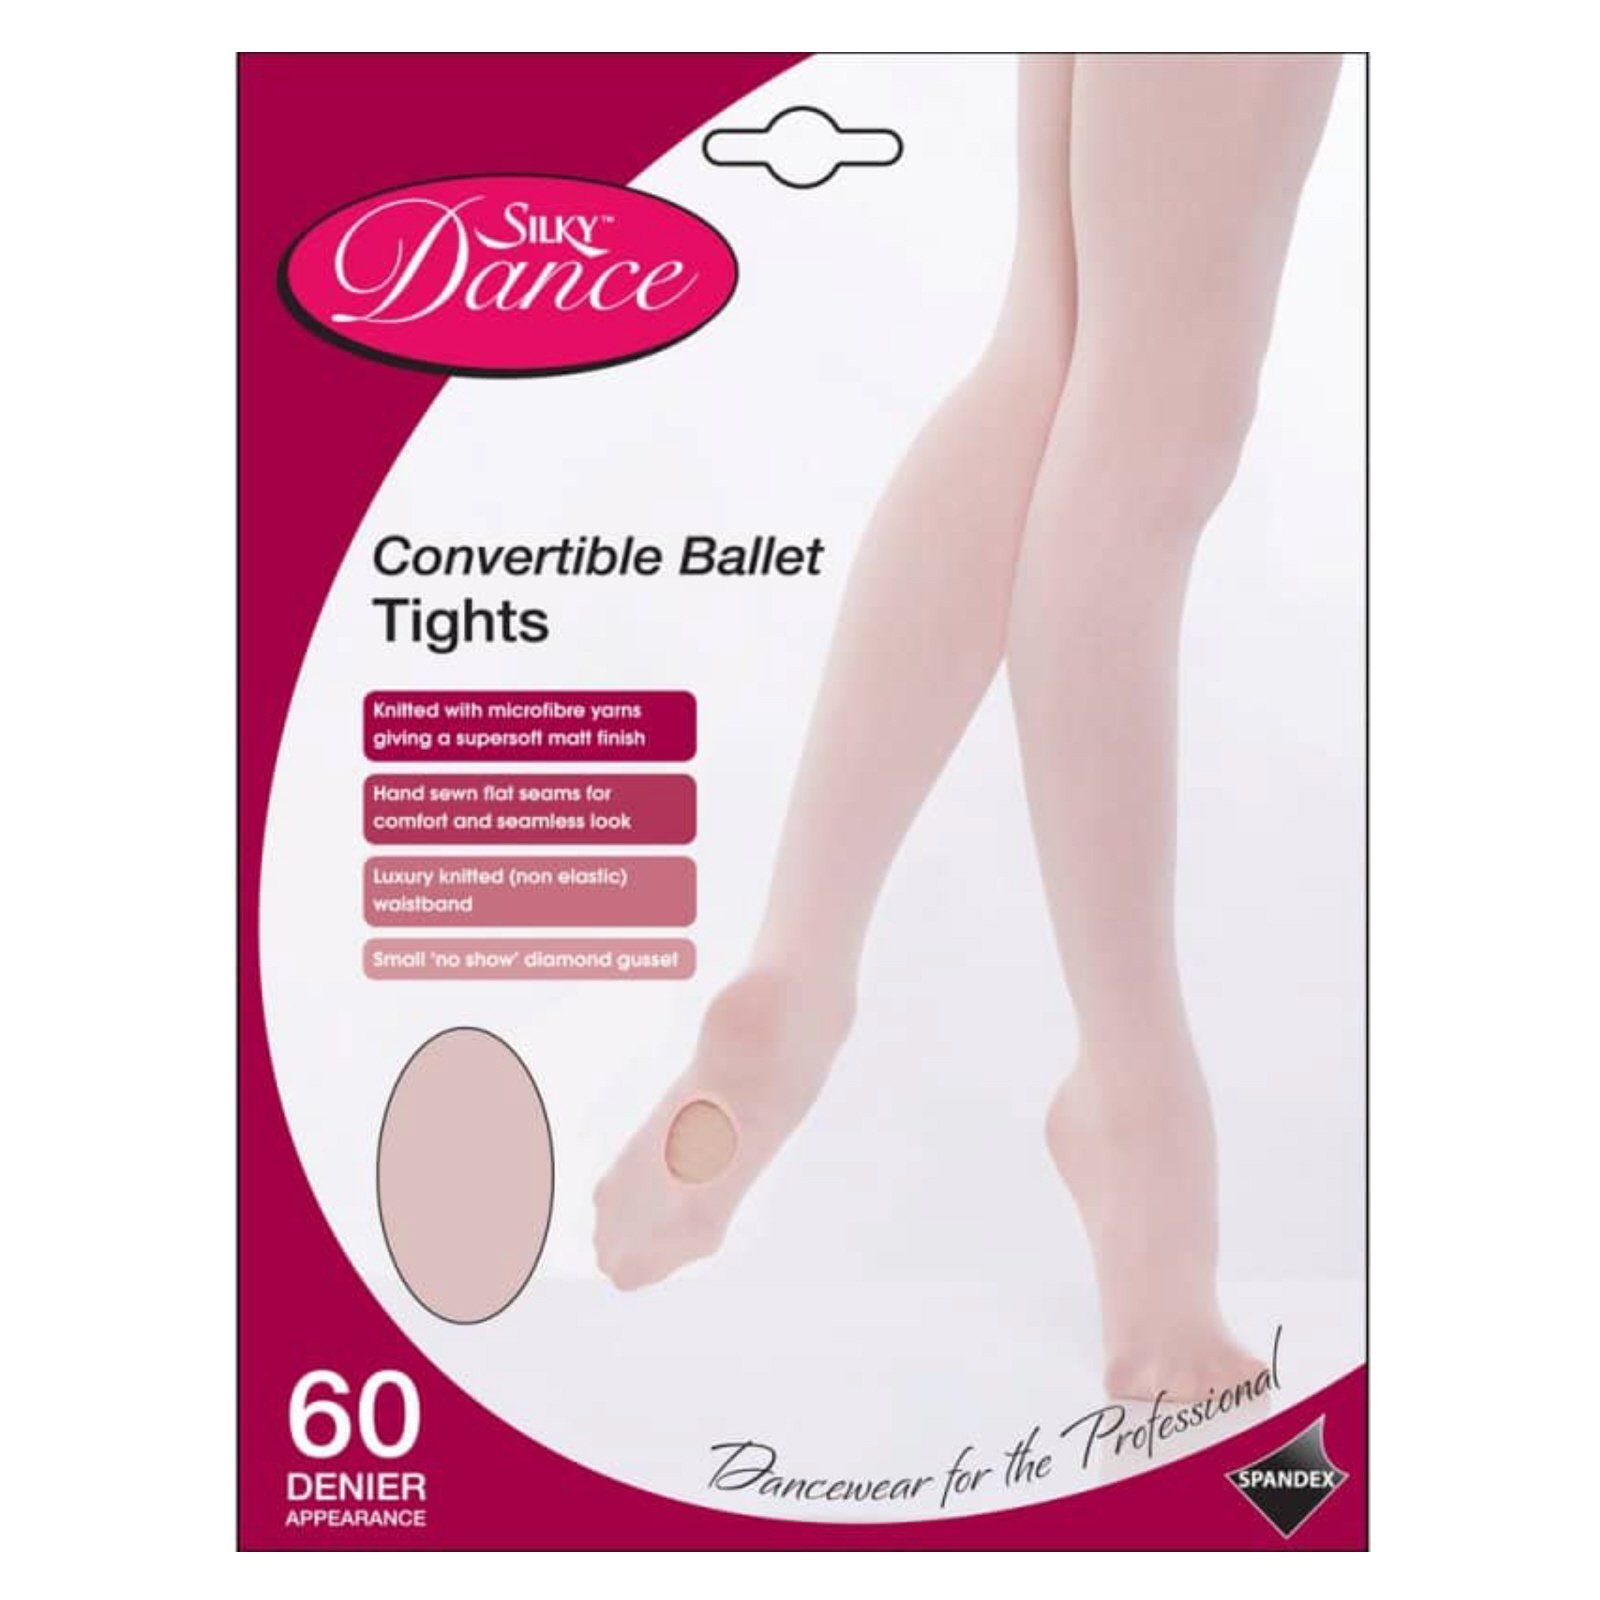 Silky convertible ballet tights- Pink - Dance Store Direct